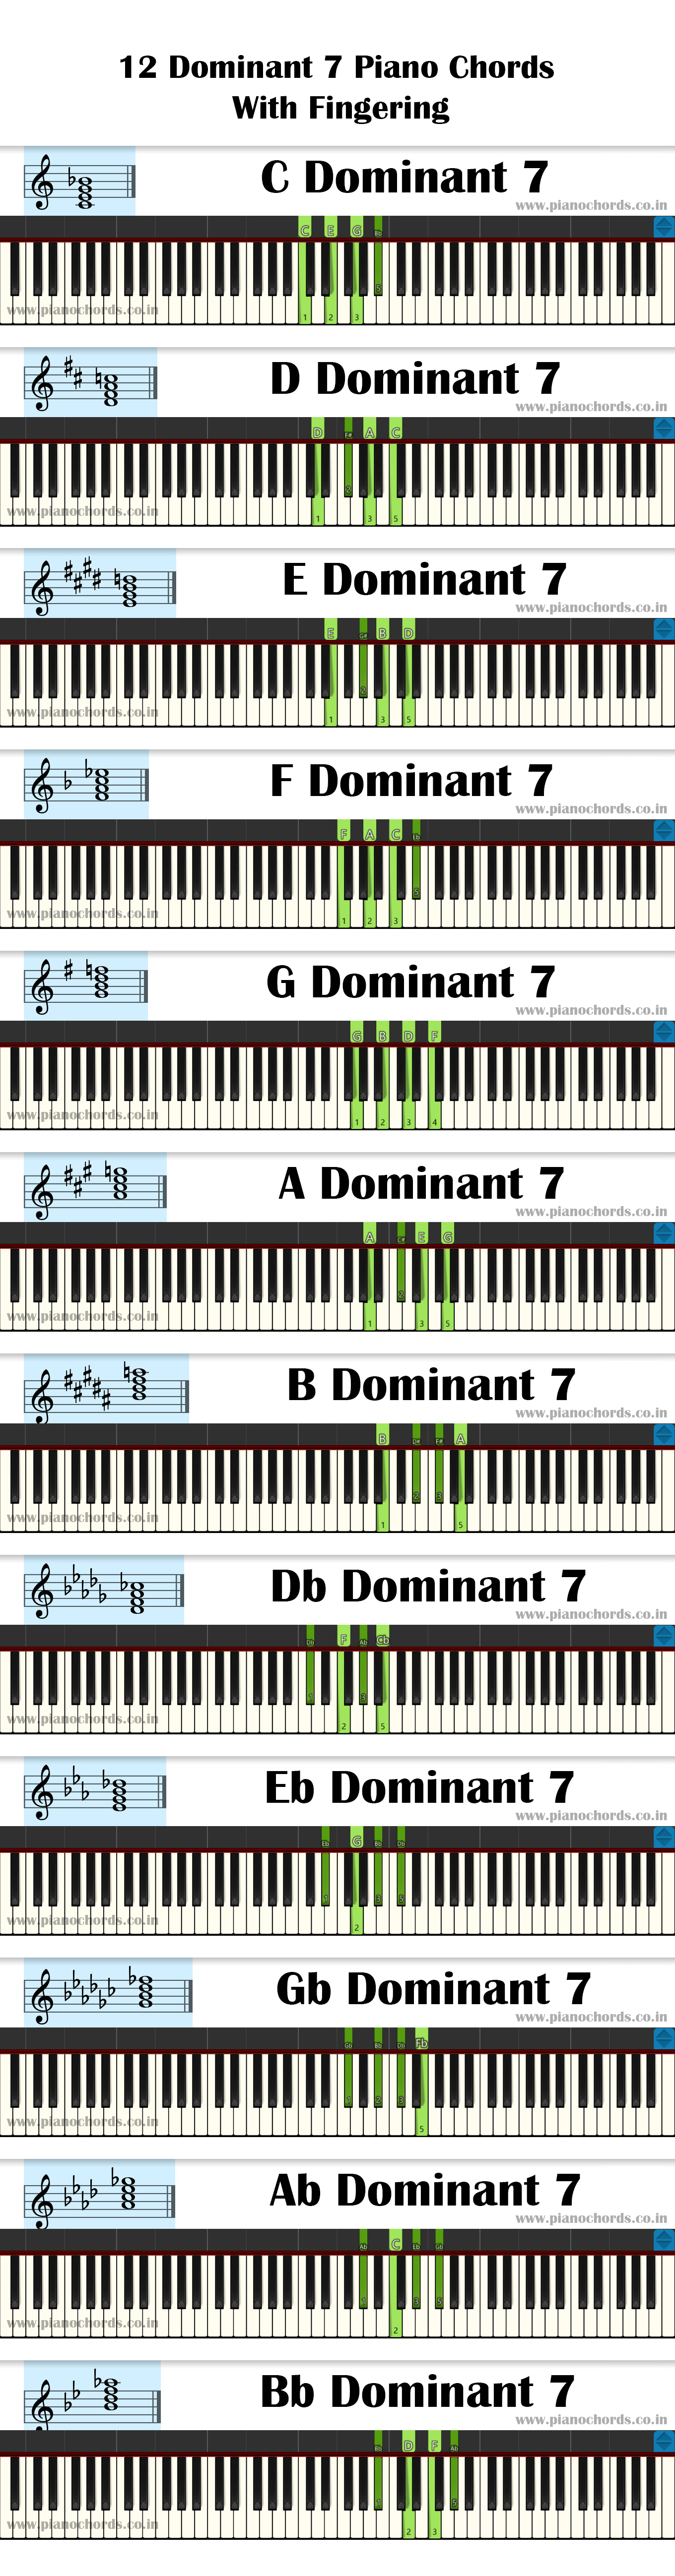 12 Dominant 7 Piano Chords With Fingering, Diagram, Staff Notation